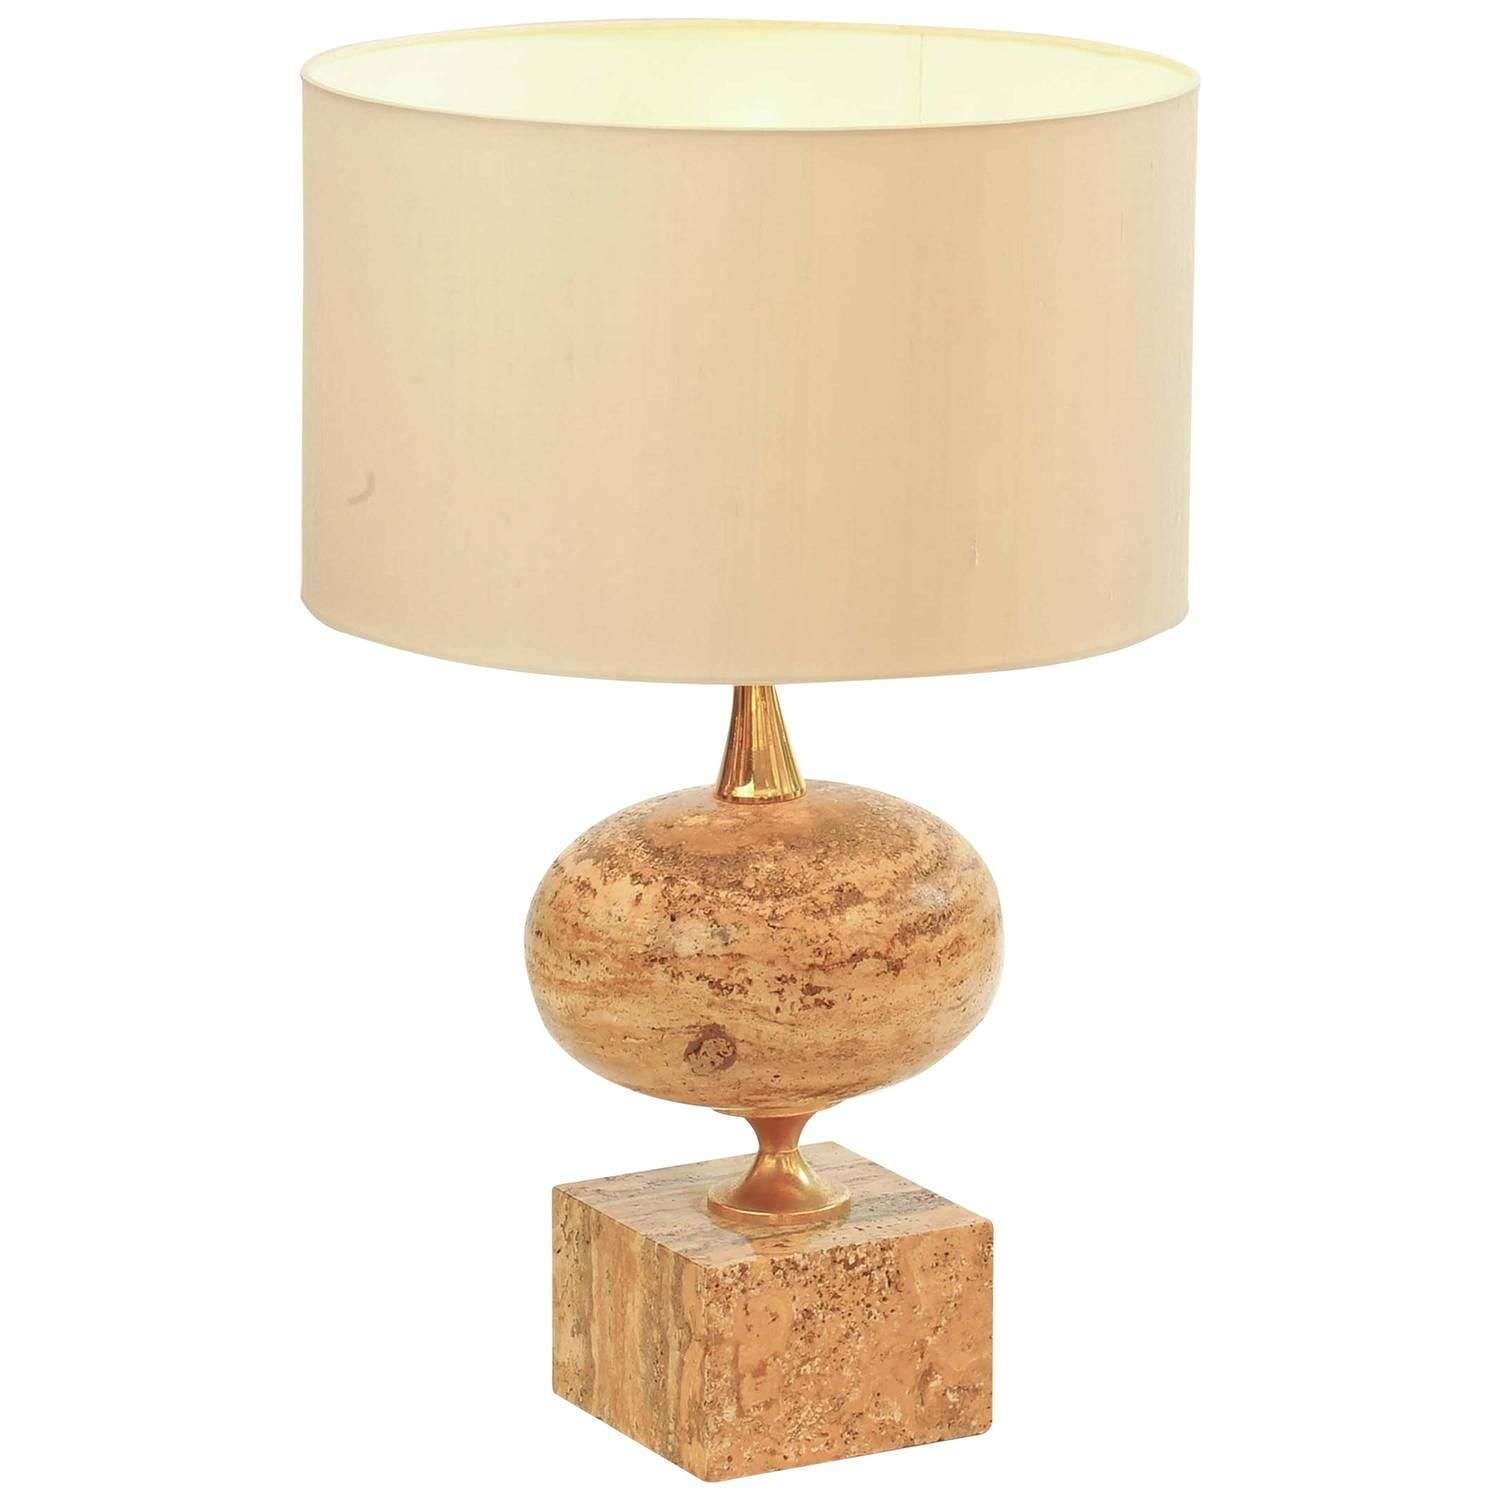 1970s Travertine Table Lamp by Maison Barbier